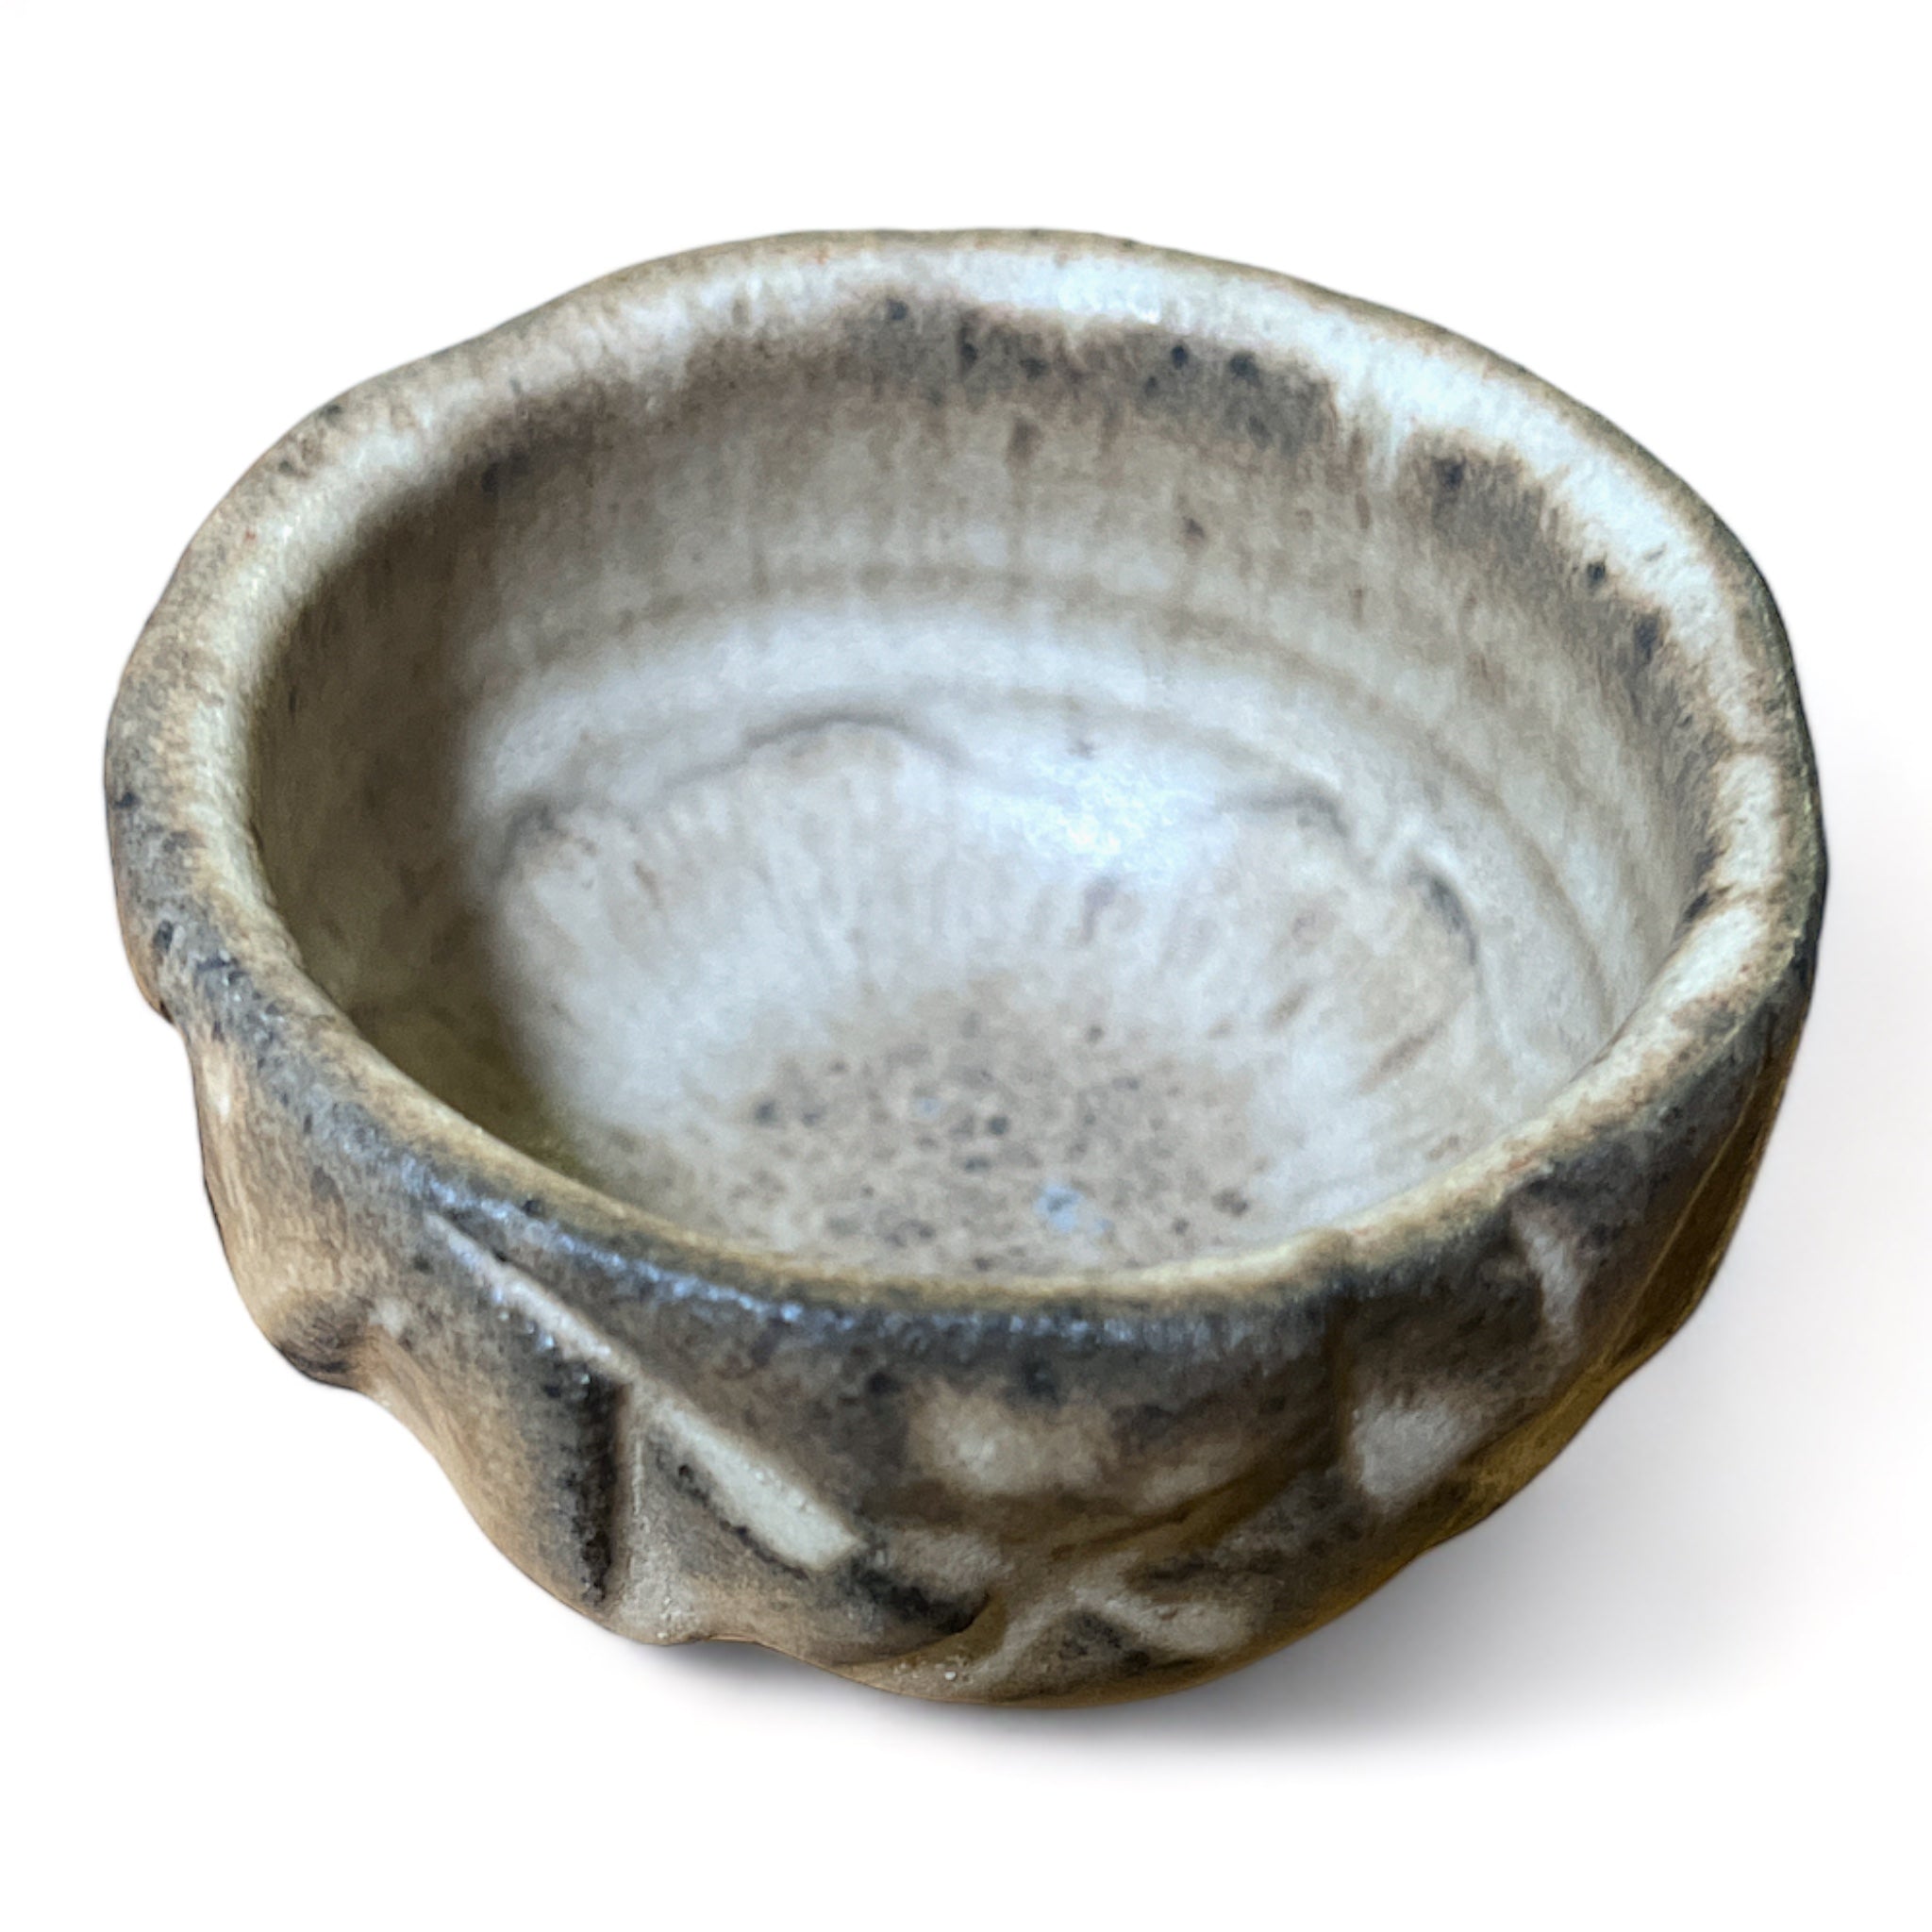 Taiwanese Handmade Wood-Fired Ceramic Teacup - Ancient Echoes